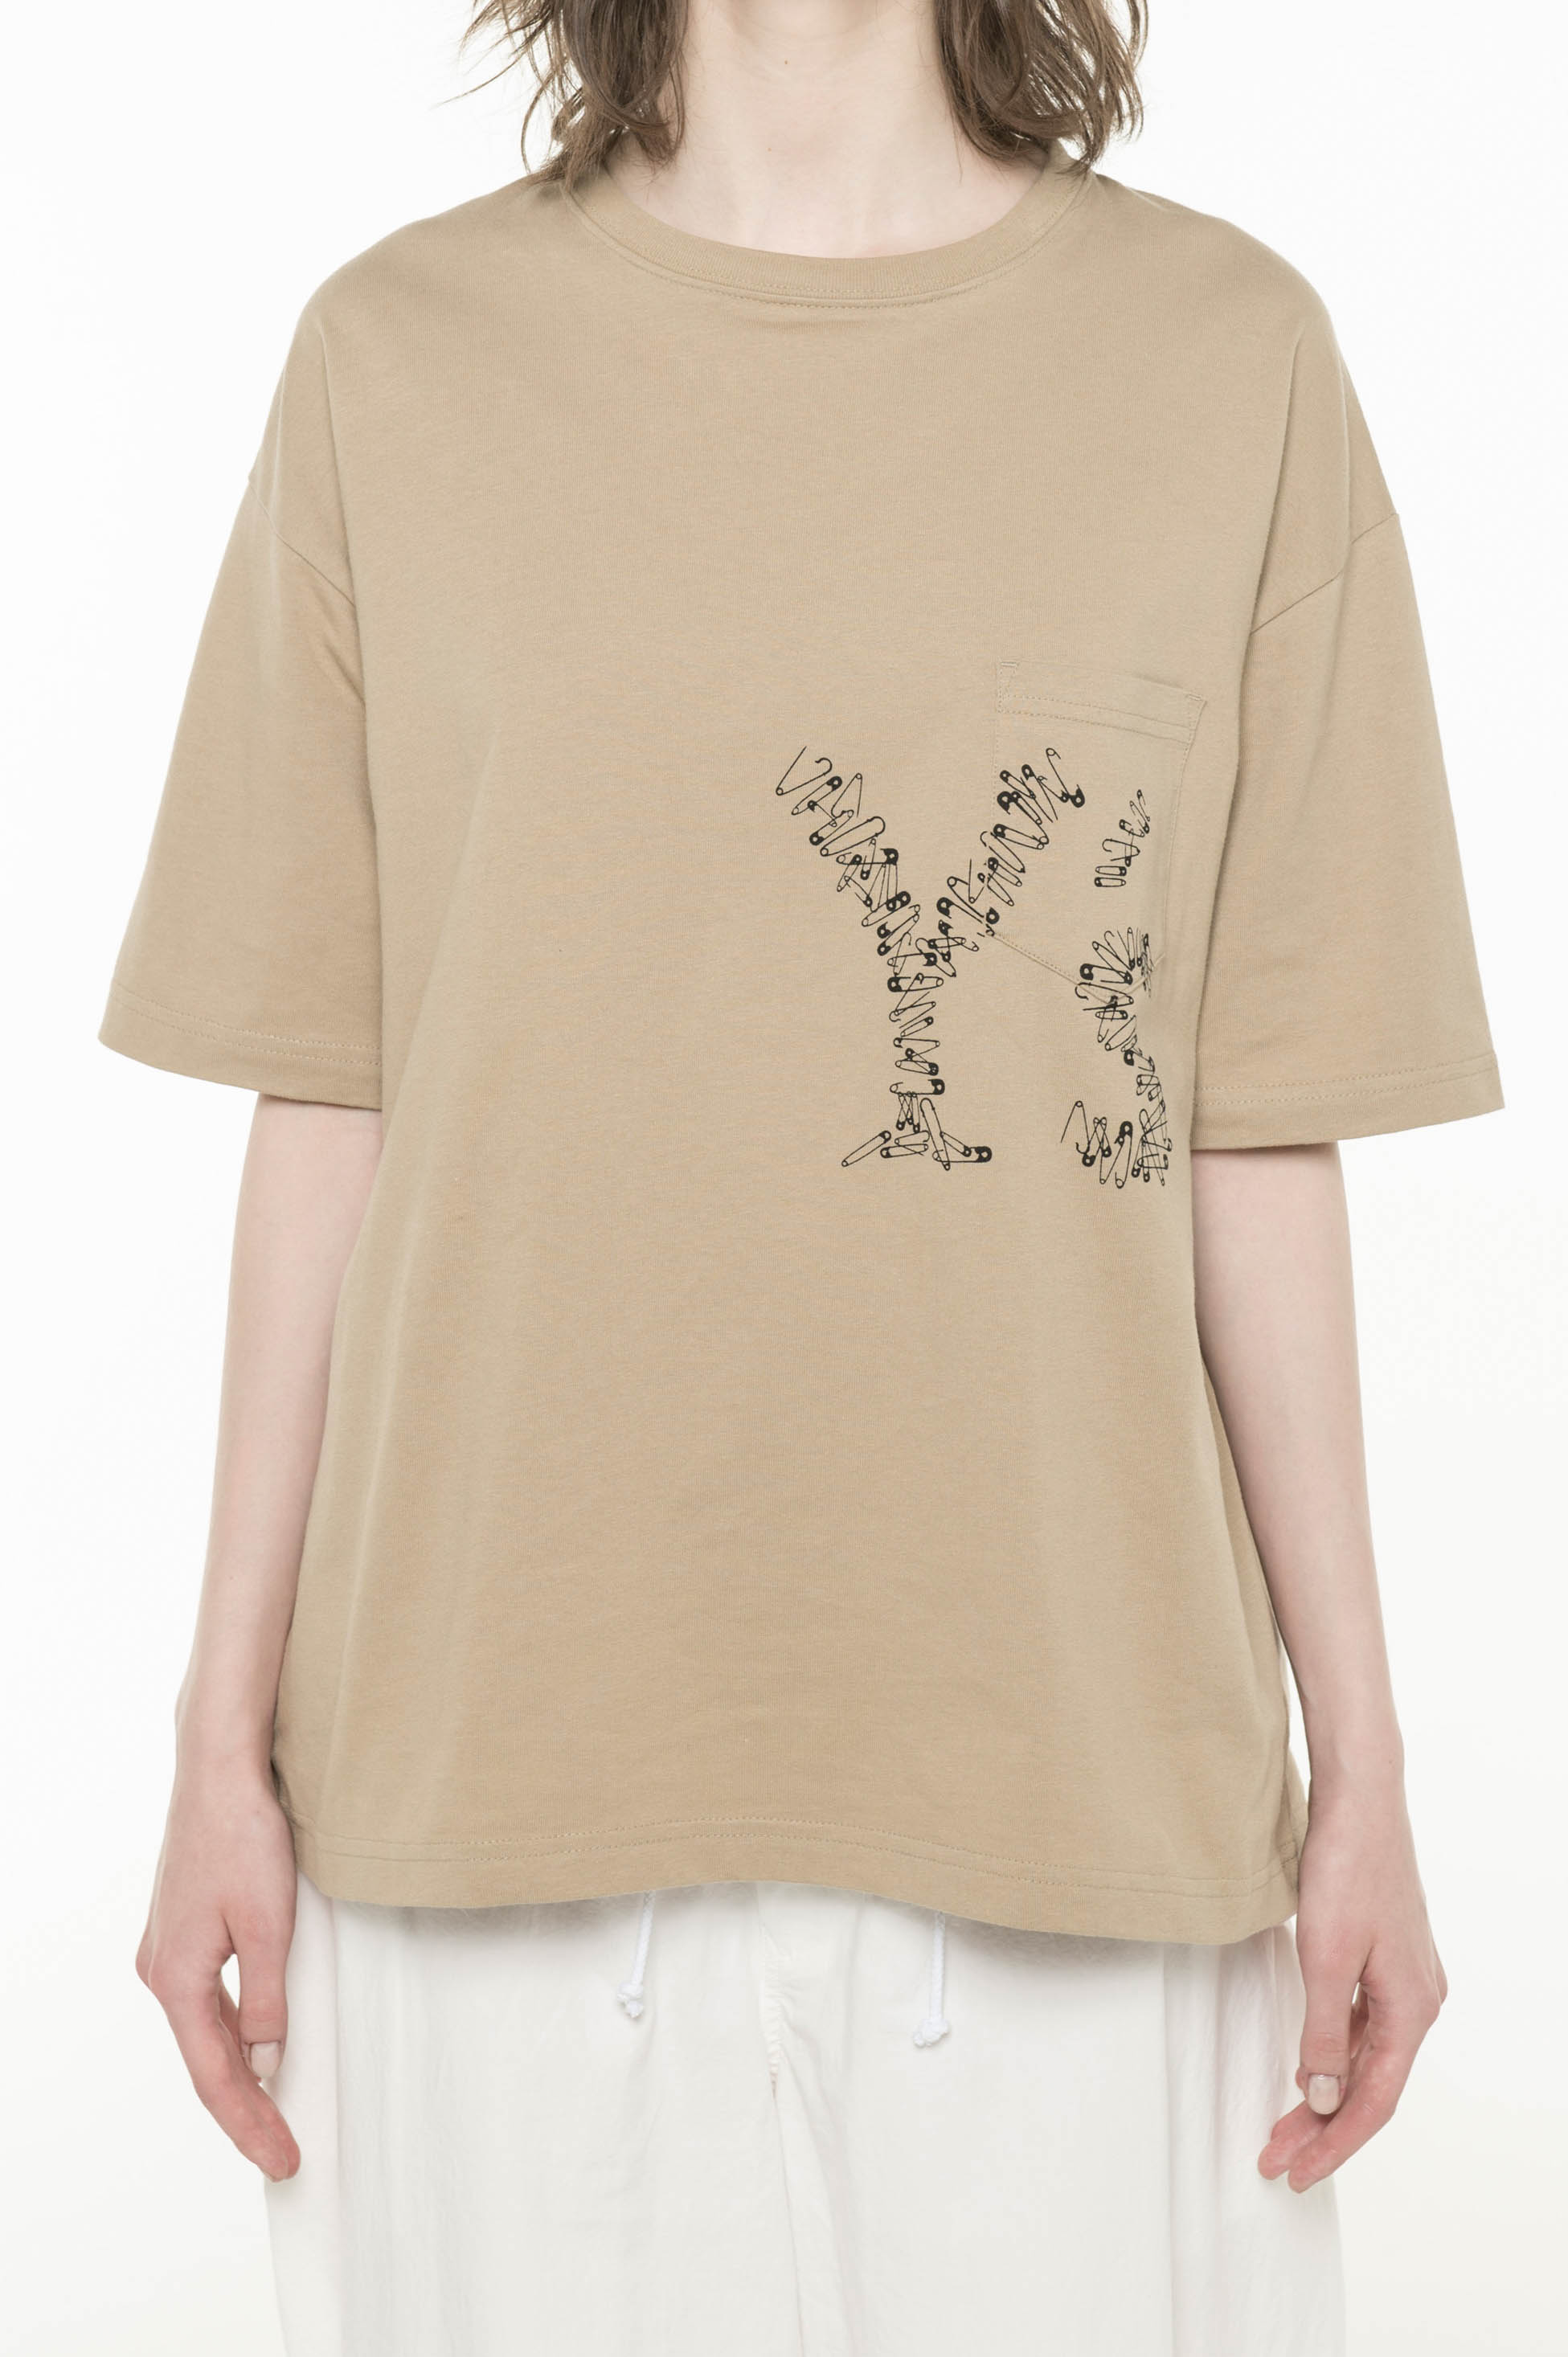 -Online EXCLUSIVE- Y's Pin T-shirt